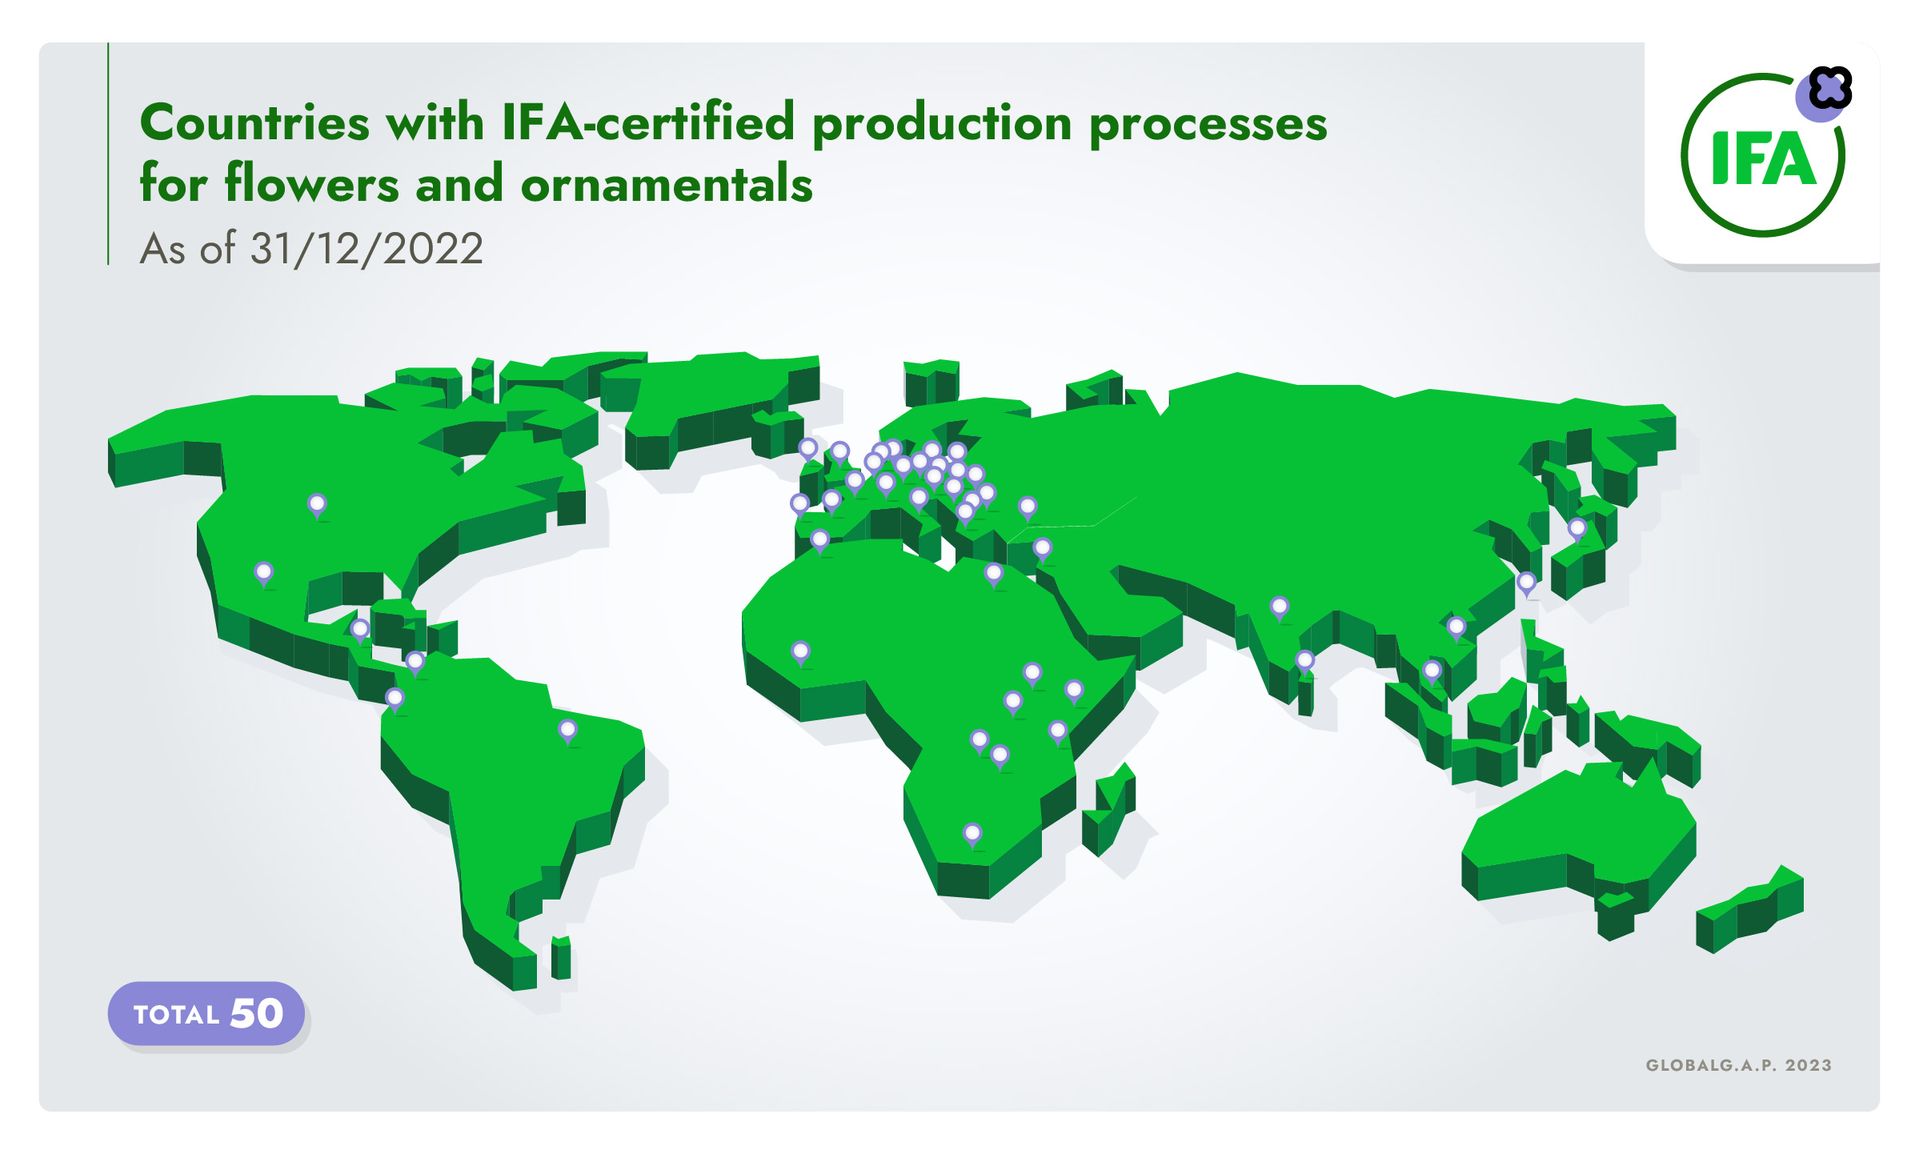 World map identifying countries with Integrated Farm Assurance certified production processes for flowers and ornamentals